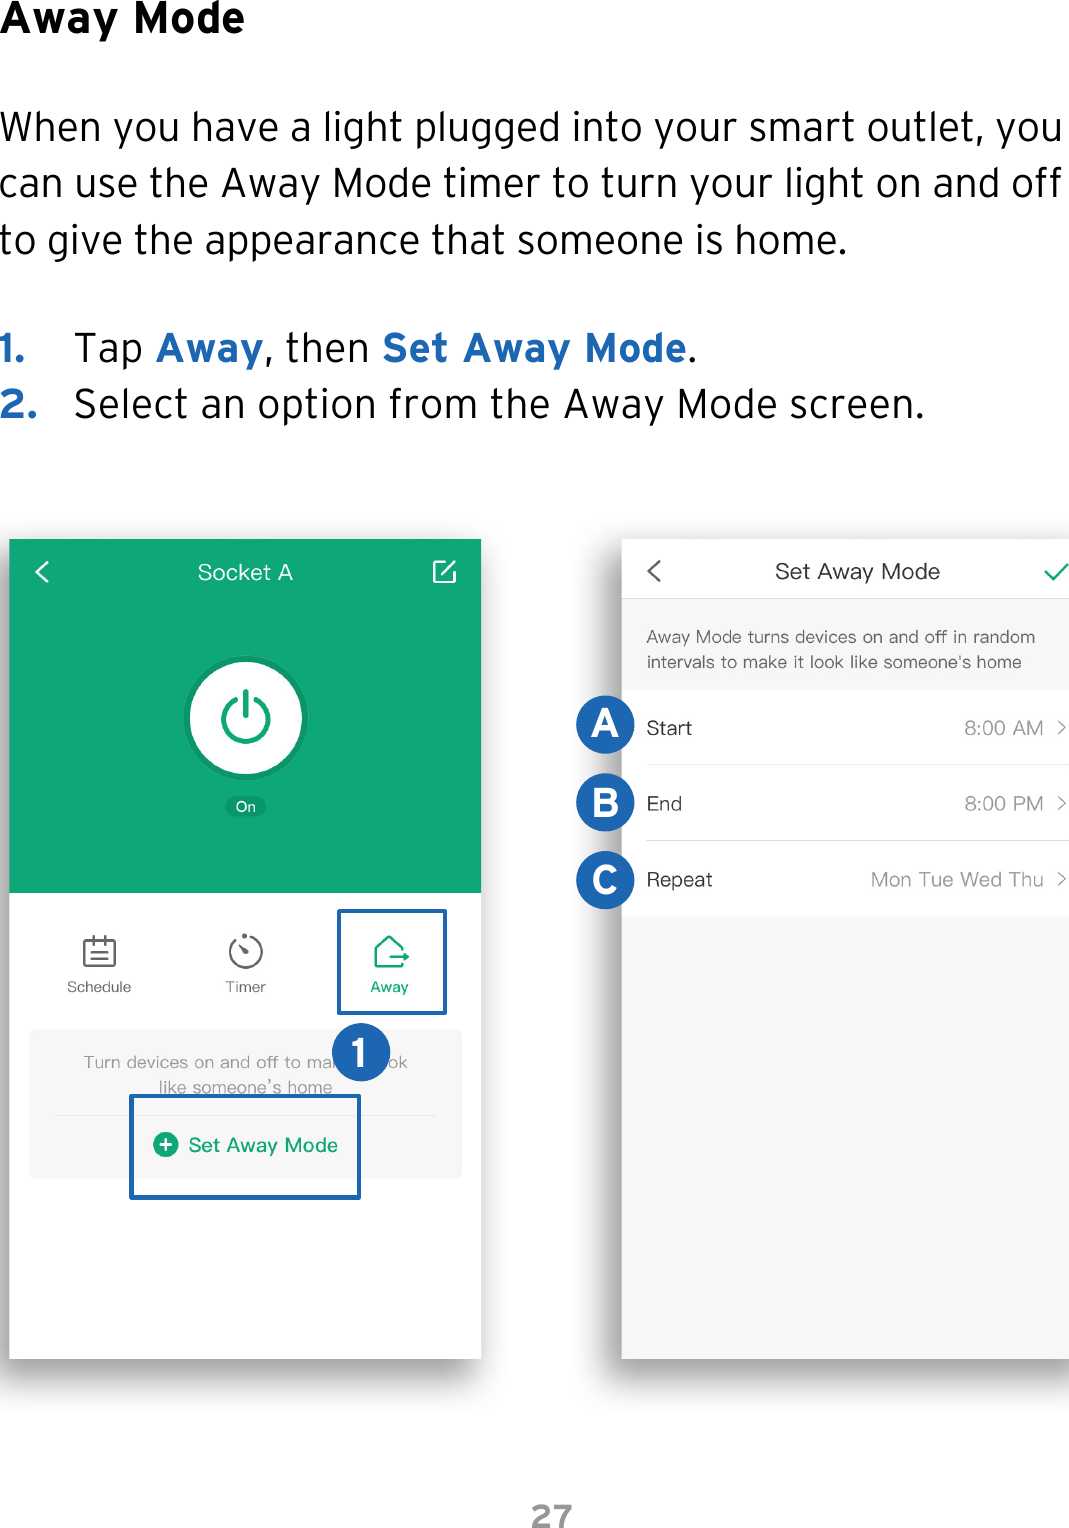 27Away ModeWhen you have a light plugged into your smart outlet, you can use the Away Mode timer to turn your light on and off to give the appearance that someone is home.1.  Tap Away, then Set Away Mode.2.  Select an option from the Away Mode screen.BAC1